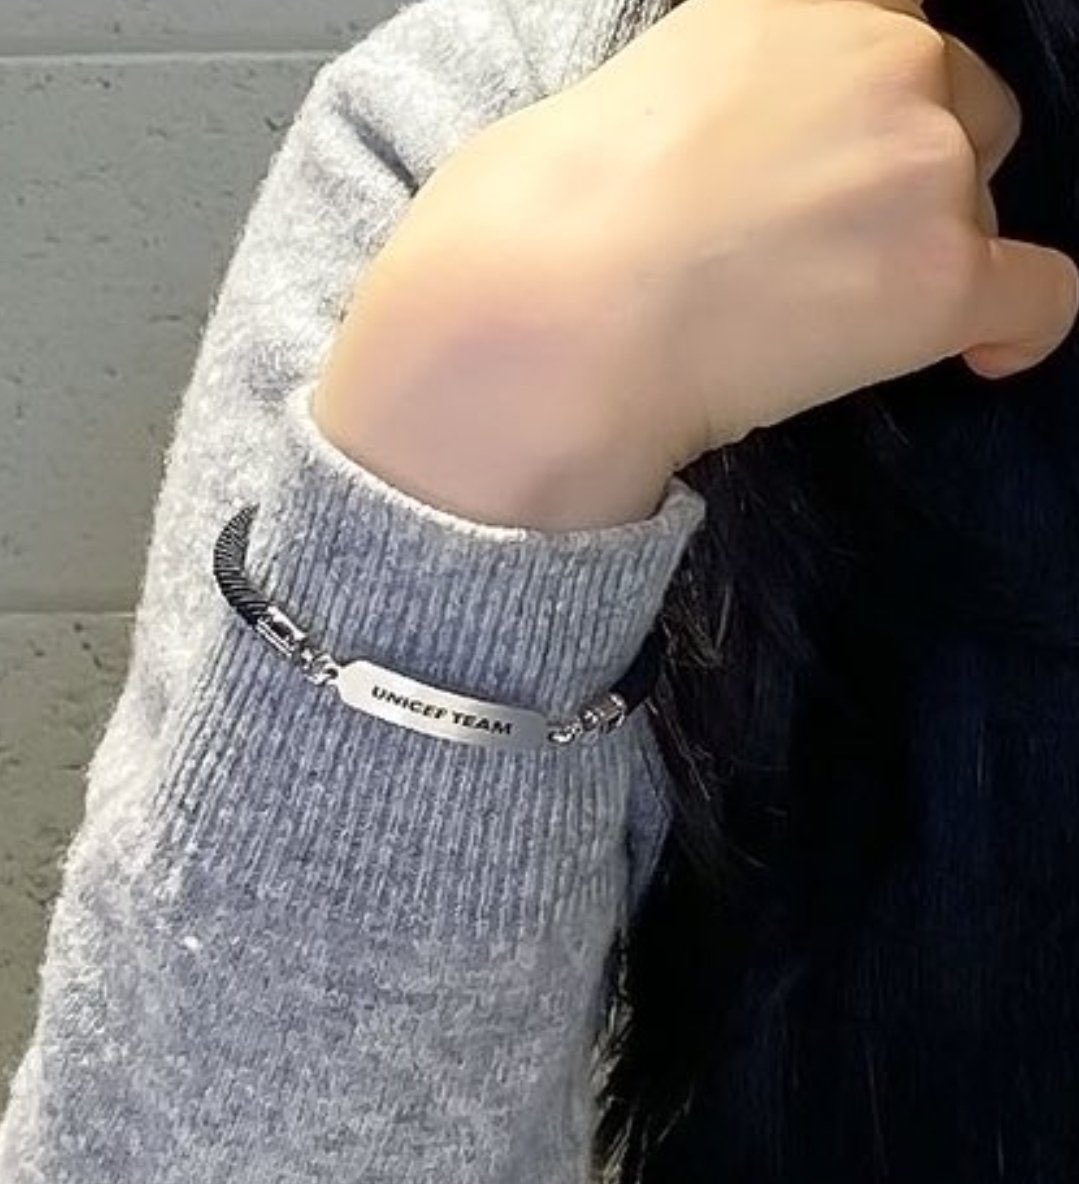 K 🫧 on X: Isa is wearing a UNICEF team bracelet. This campaign